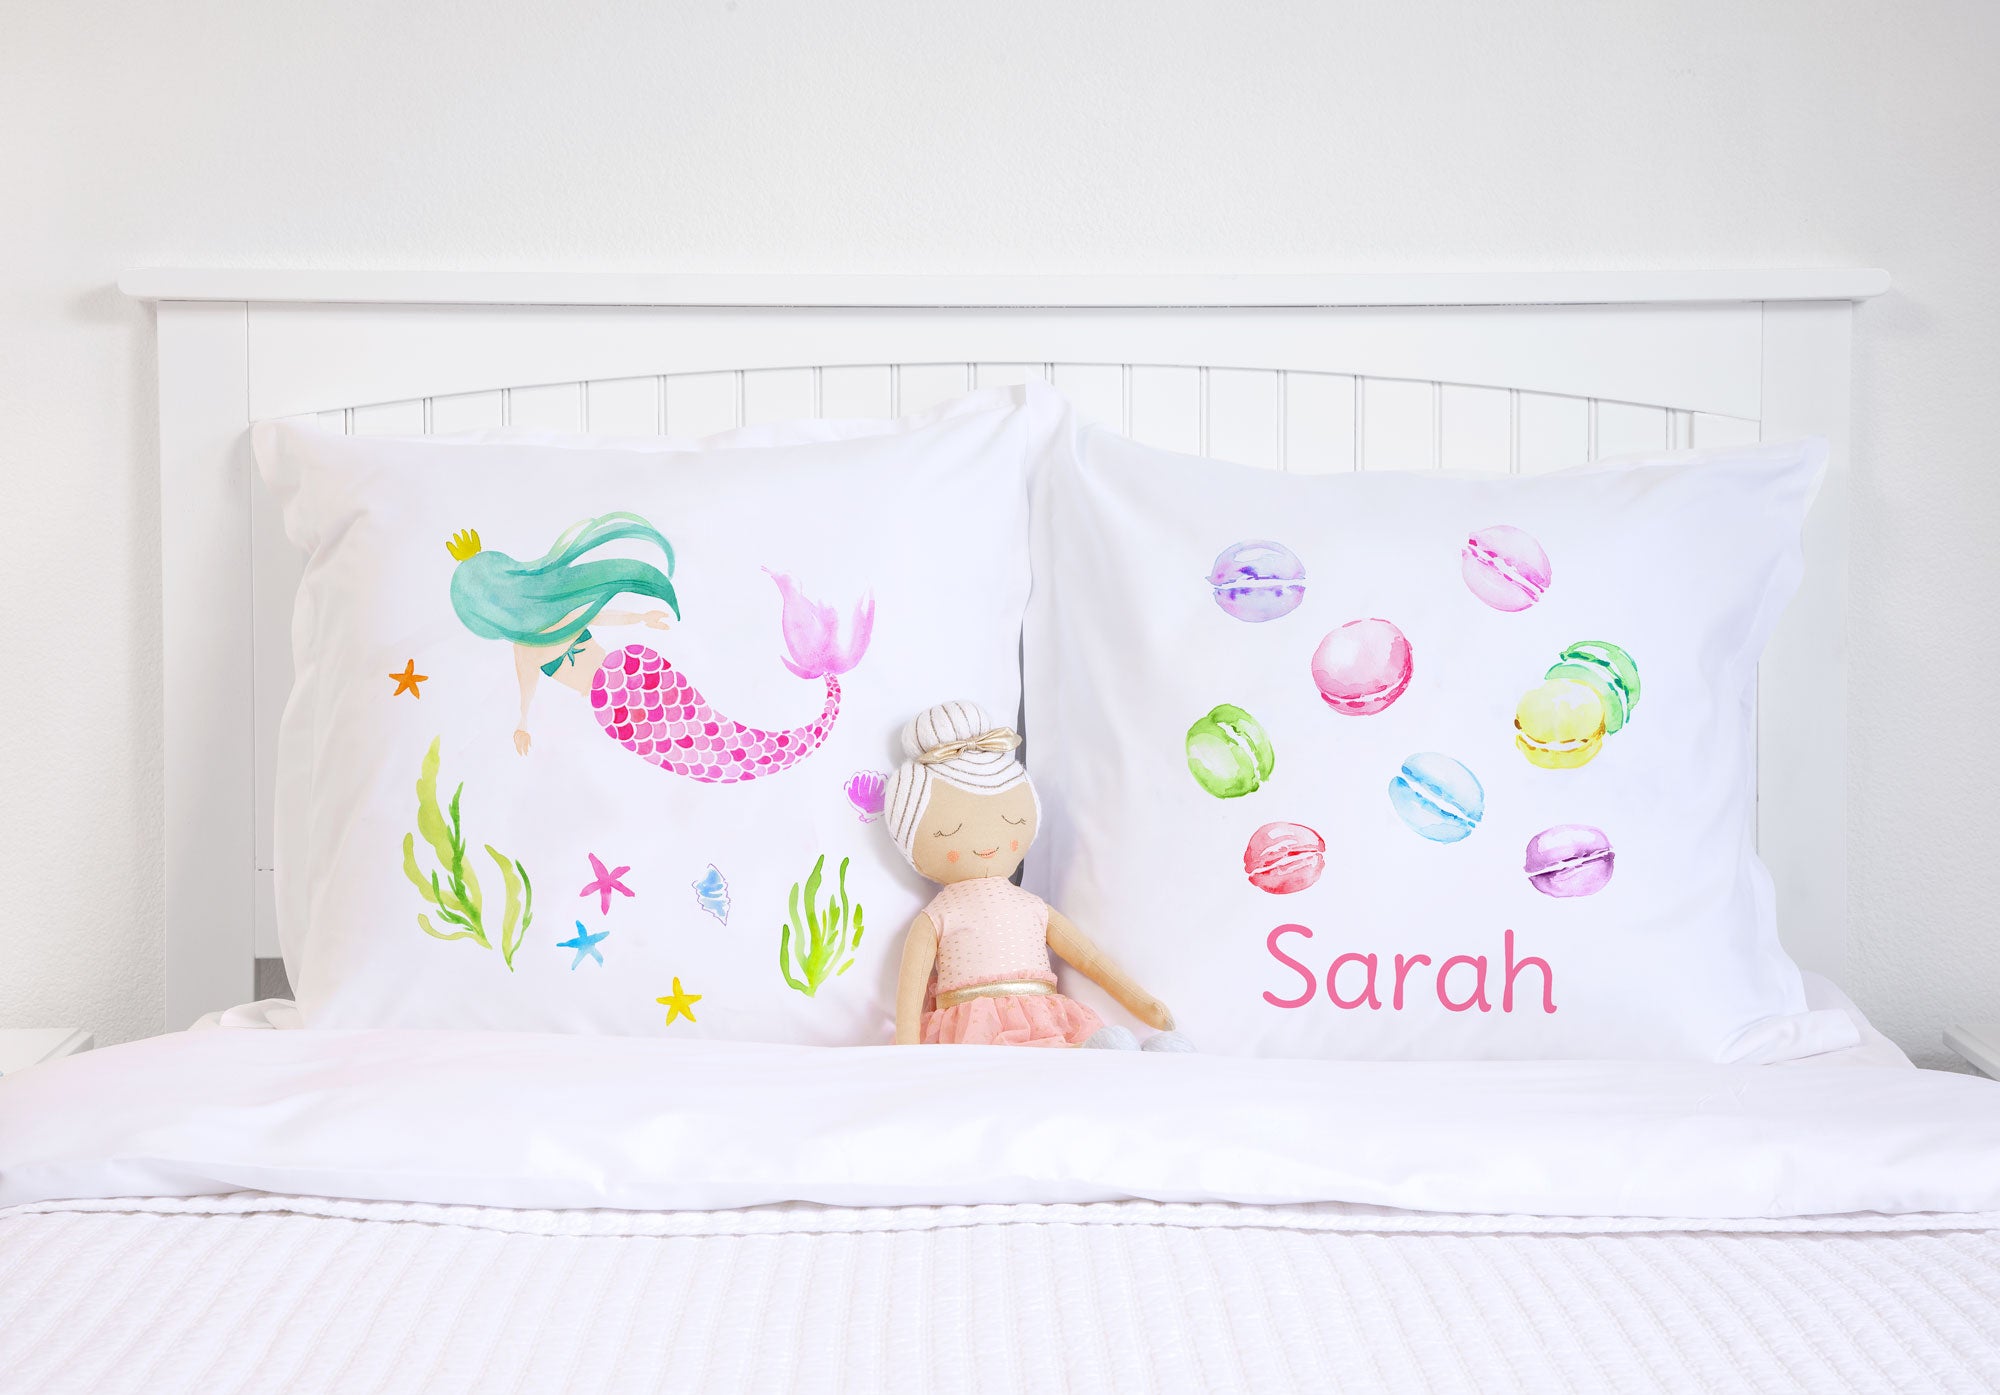 Colorful Mermaid - Personalized Kids Pillowcase Collection